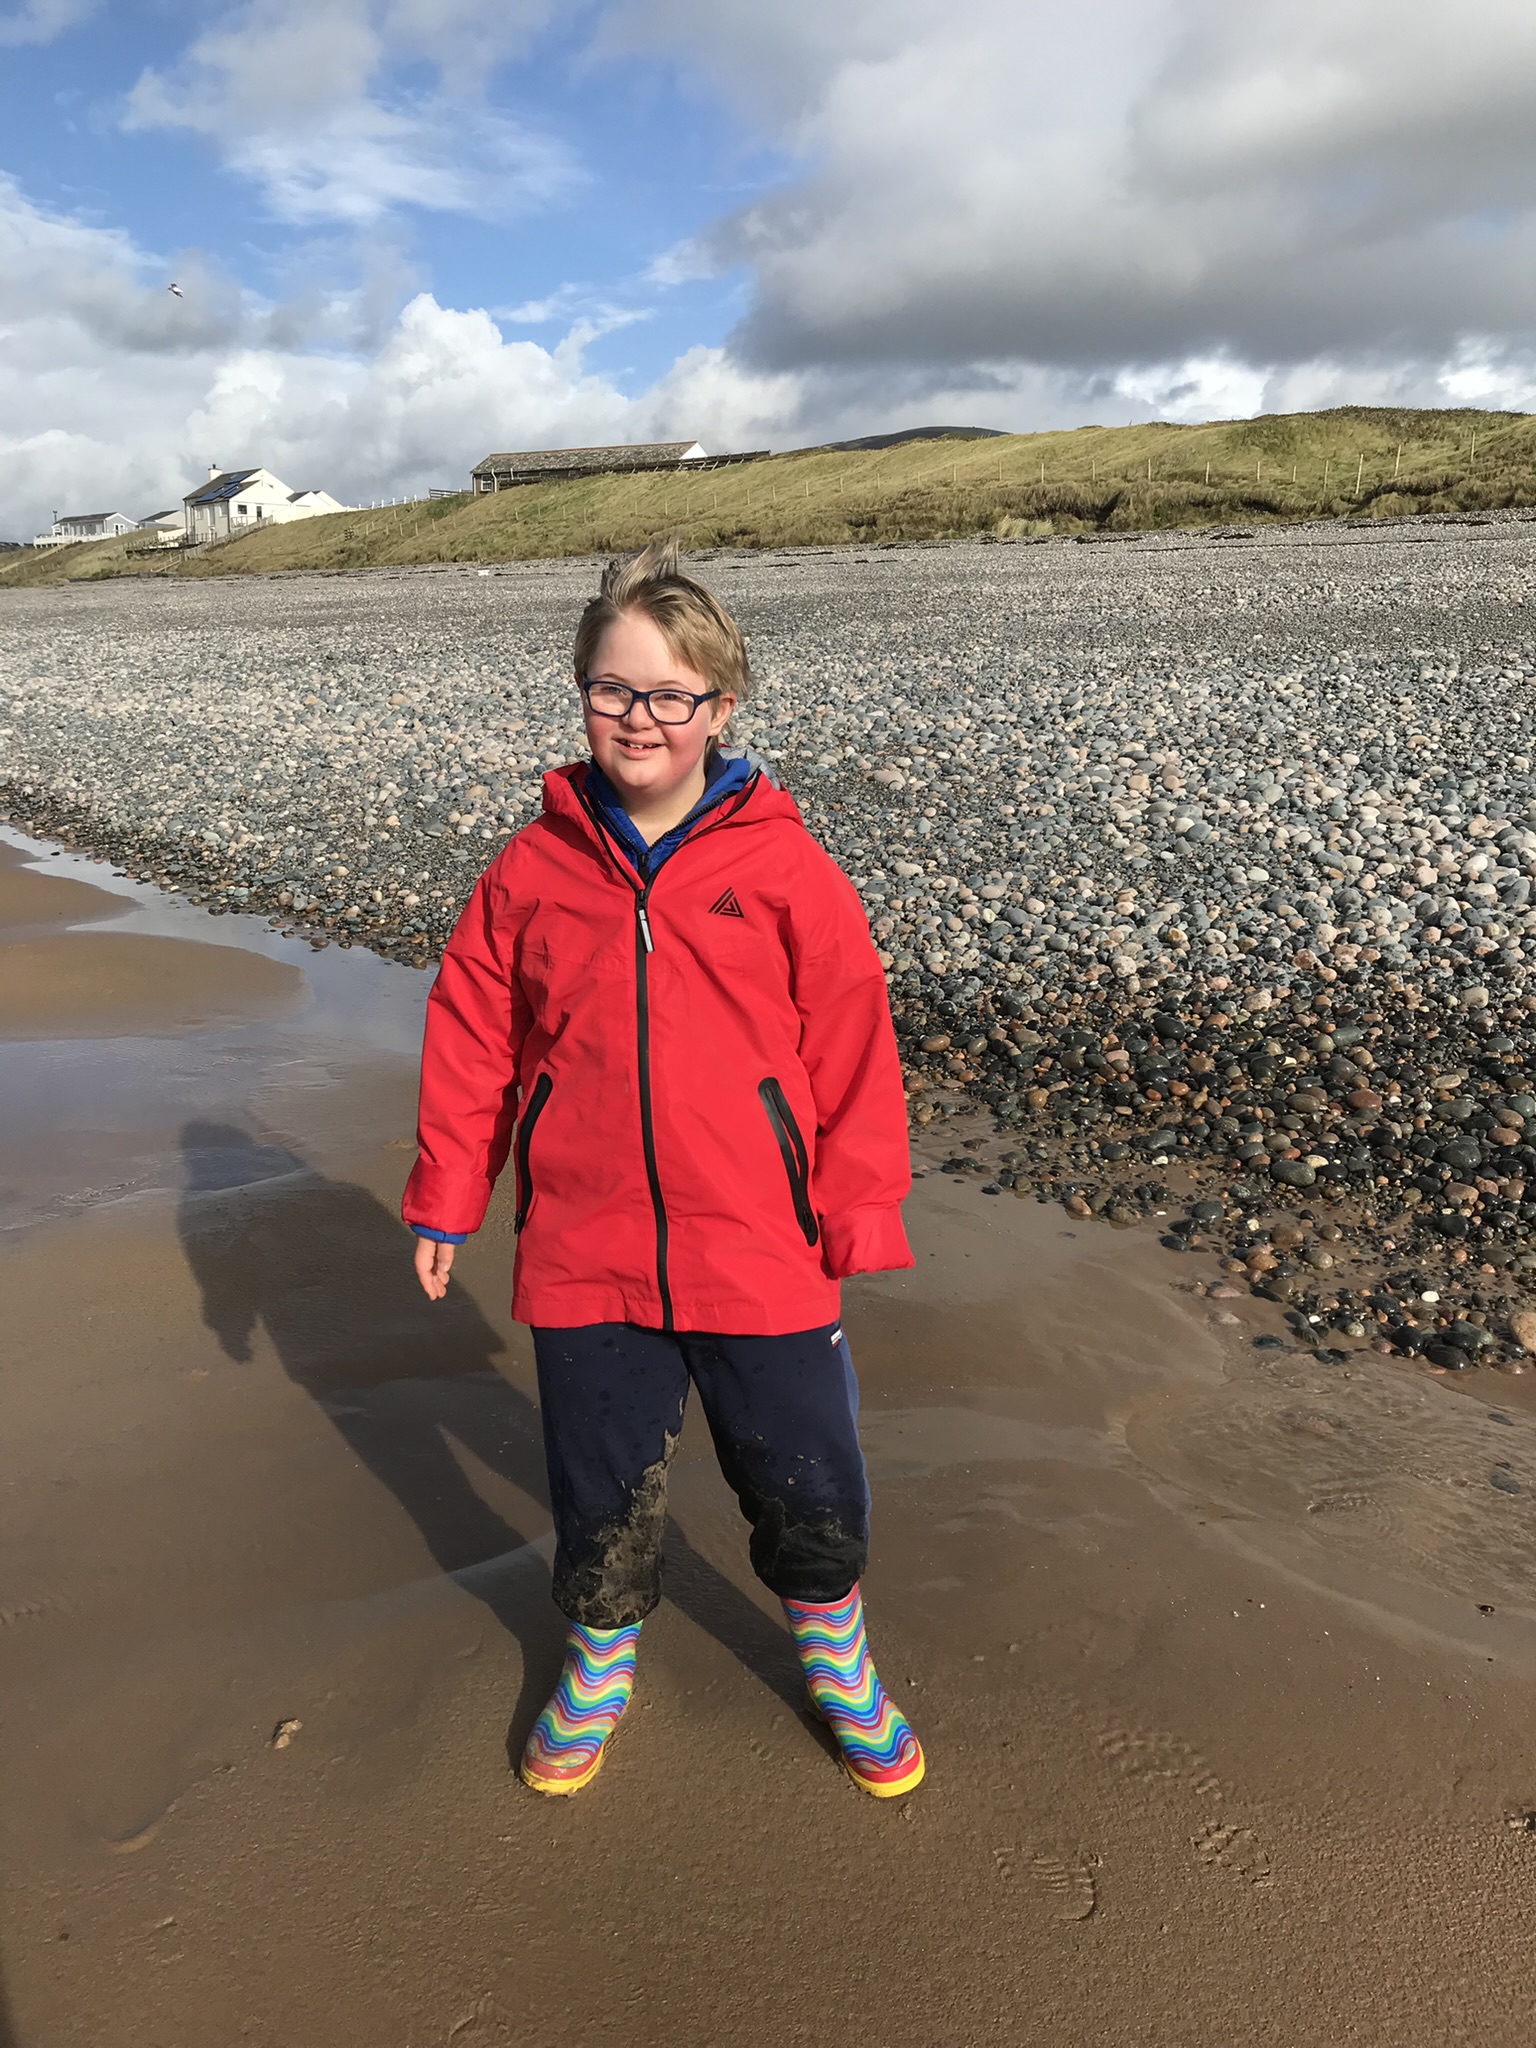 A boy stands on a pebbly beach in a bright red jacket and patterned wellington boots. He is smiling and looking at the camera.